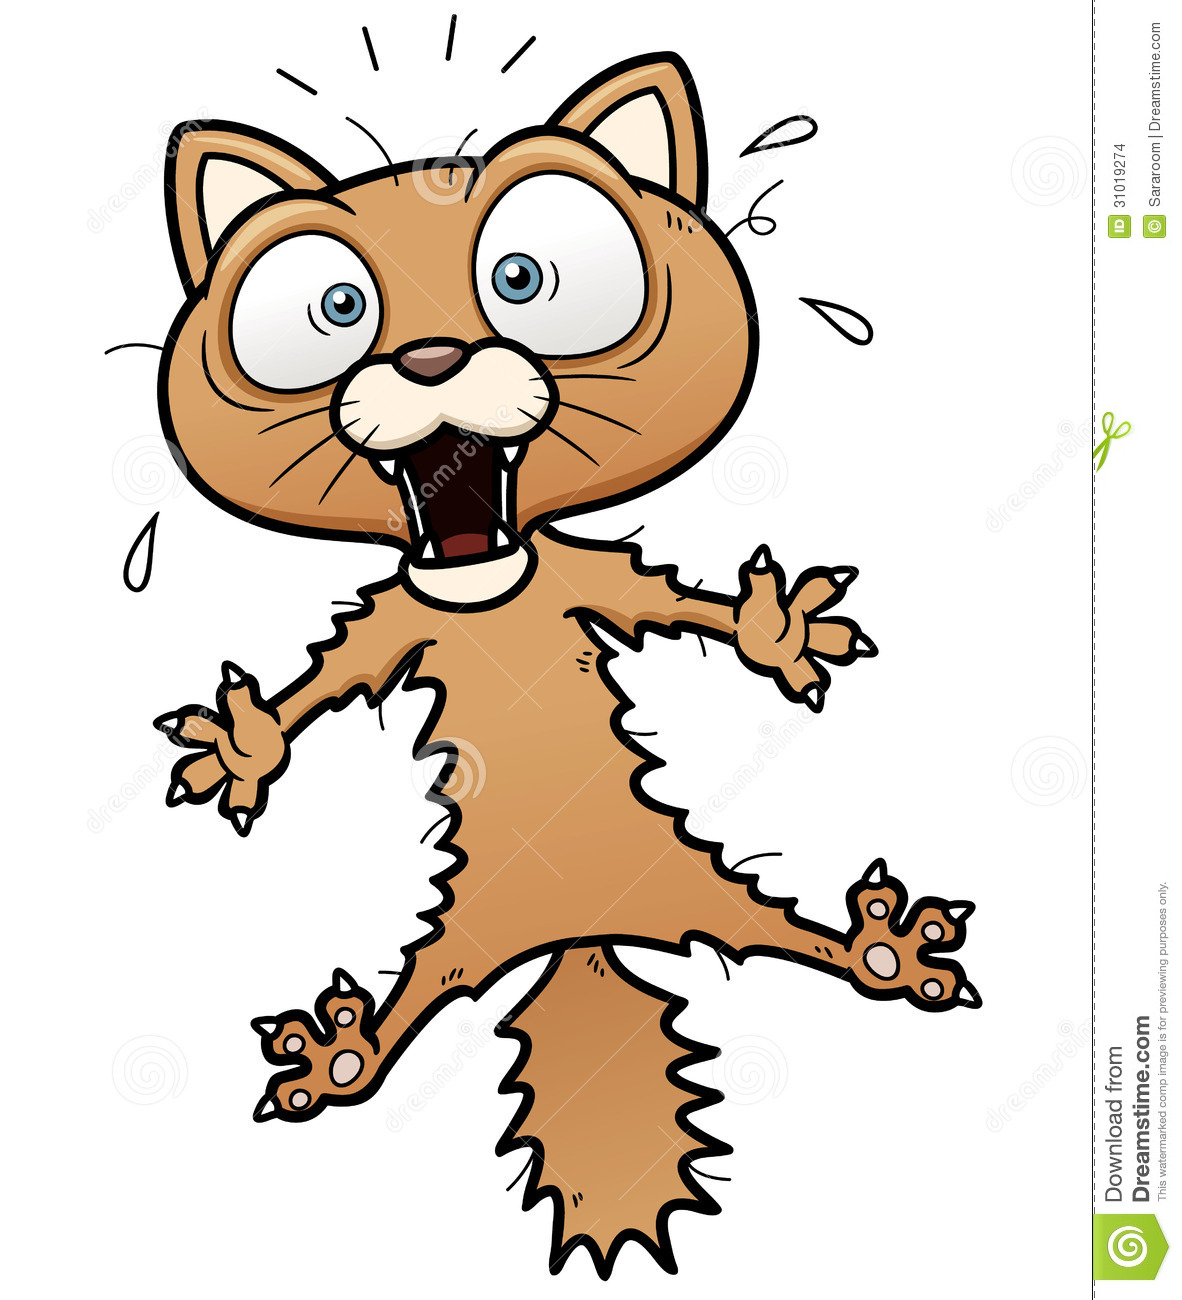 Scared Cartoon Cat Stock Images   Image  31019274